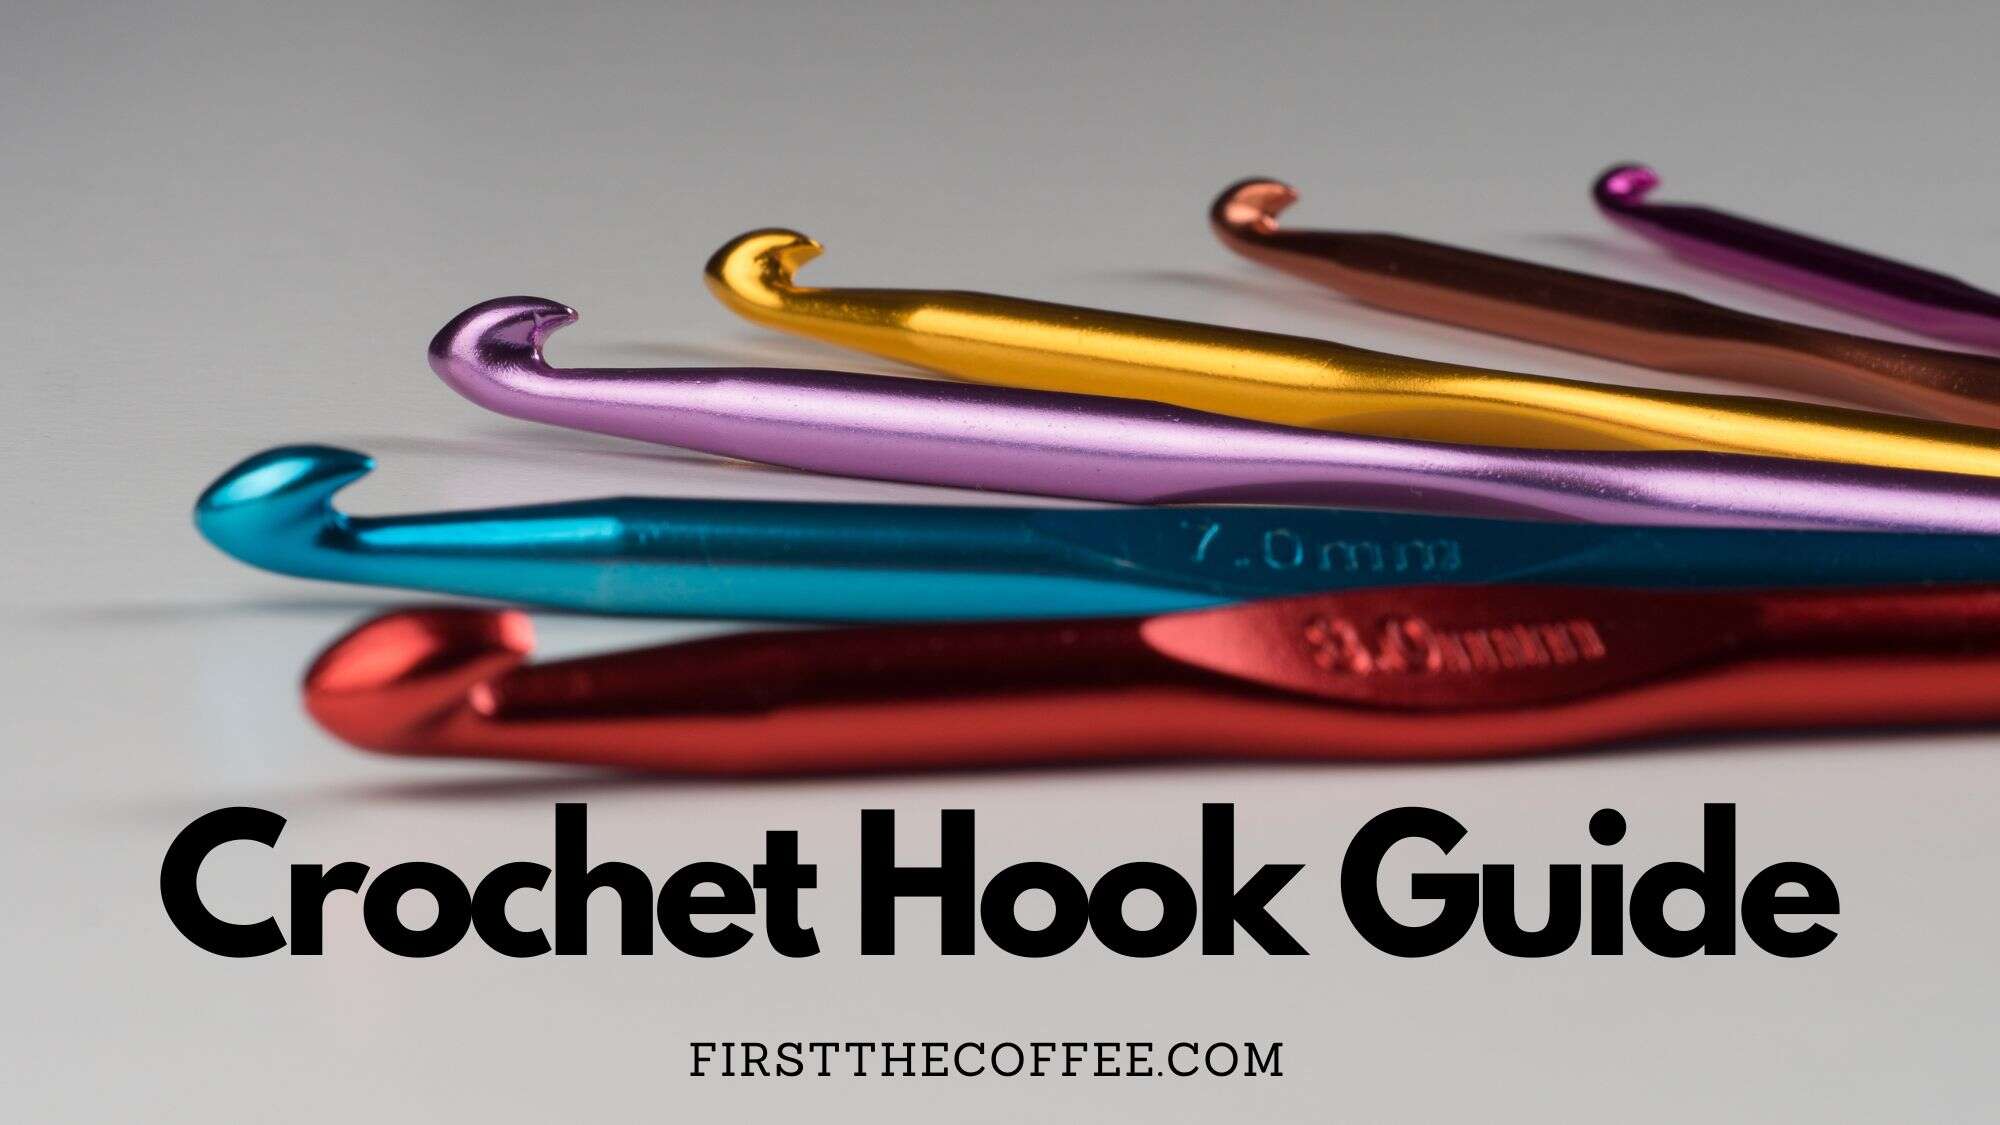 A Guide to Crochet Hooks and How to Use Them